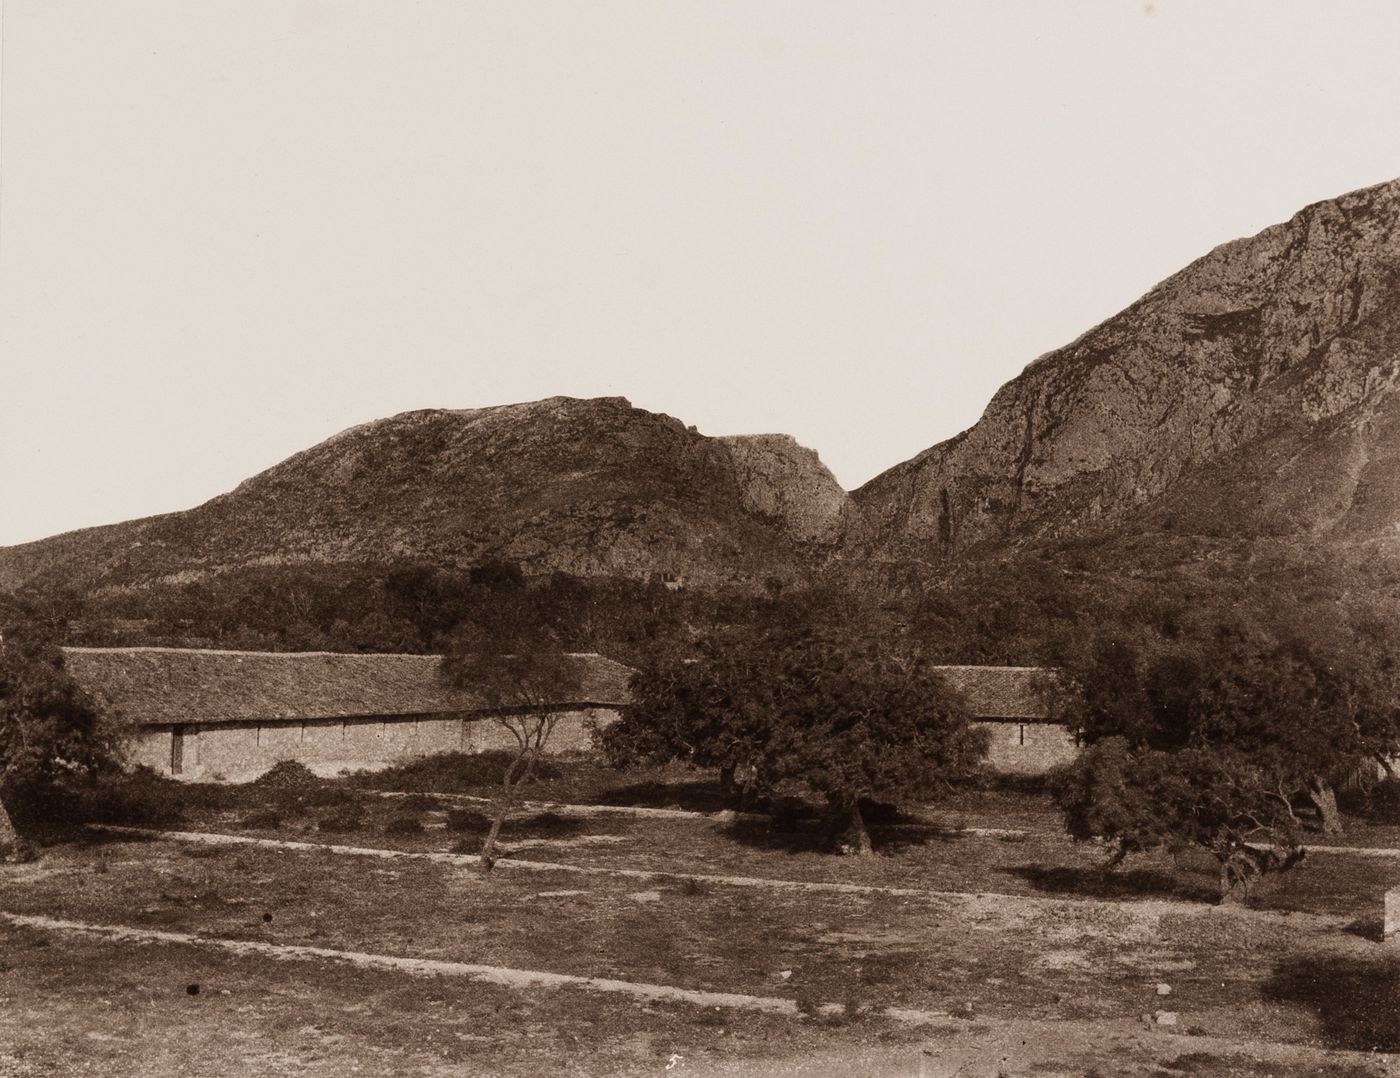 View of the entry to the Iron Canyon, Antioch, Ottoman Empire (now in Antakya, Turkey)